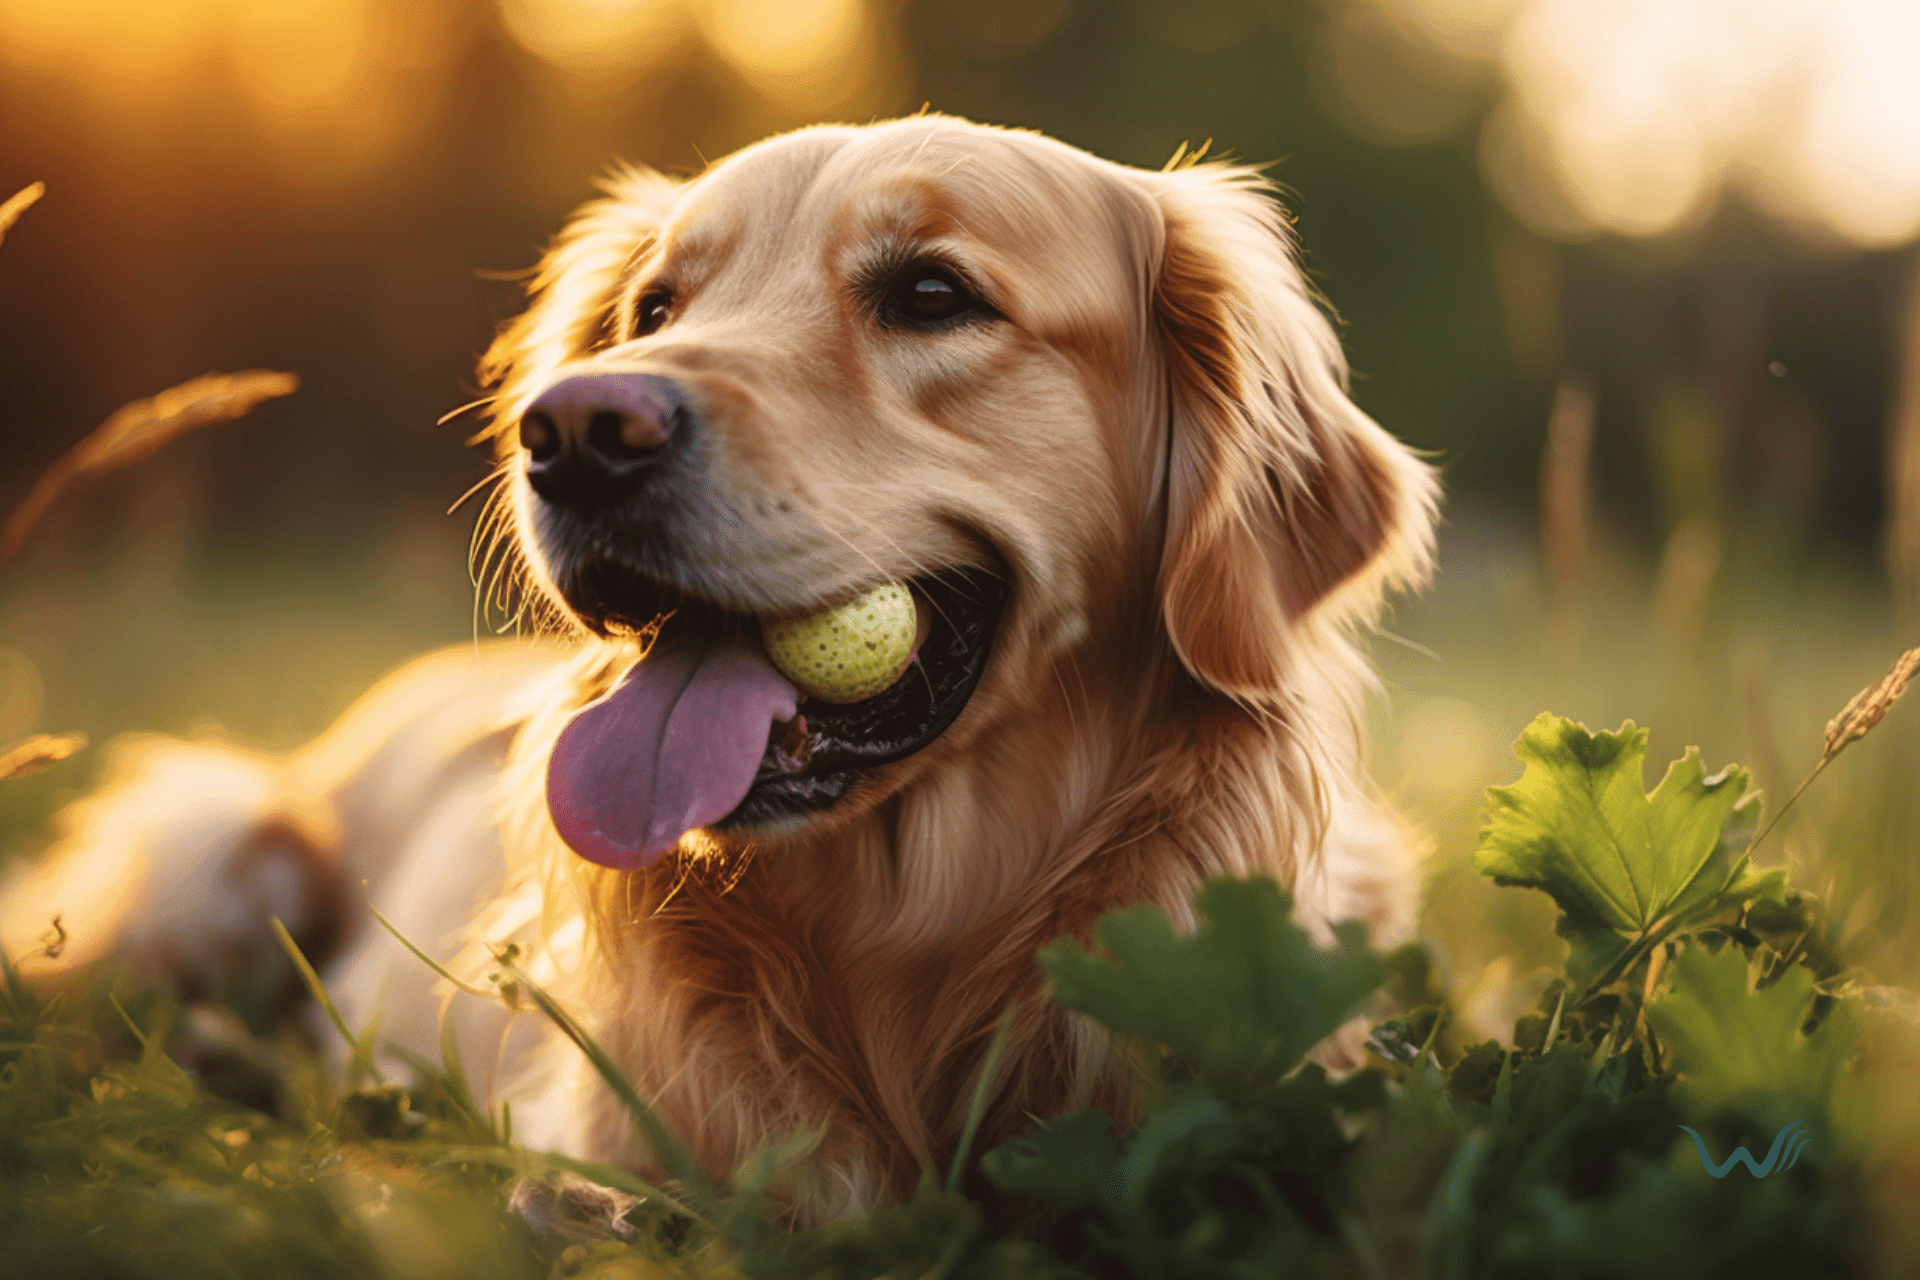 nutrition tips for dogs with food allergies